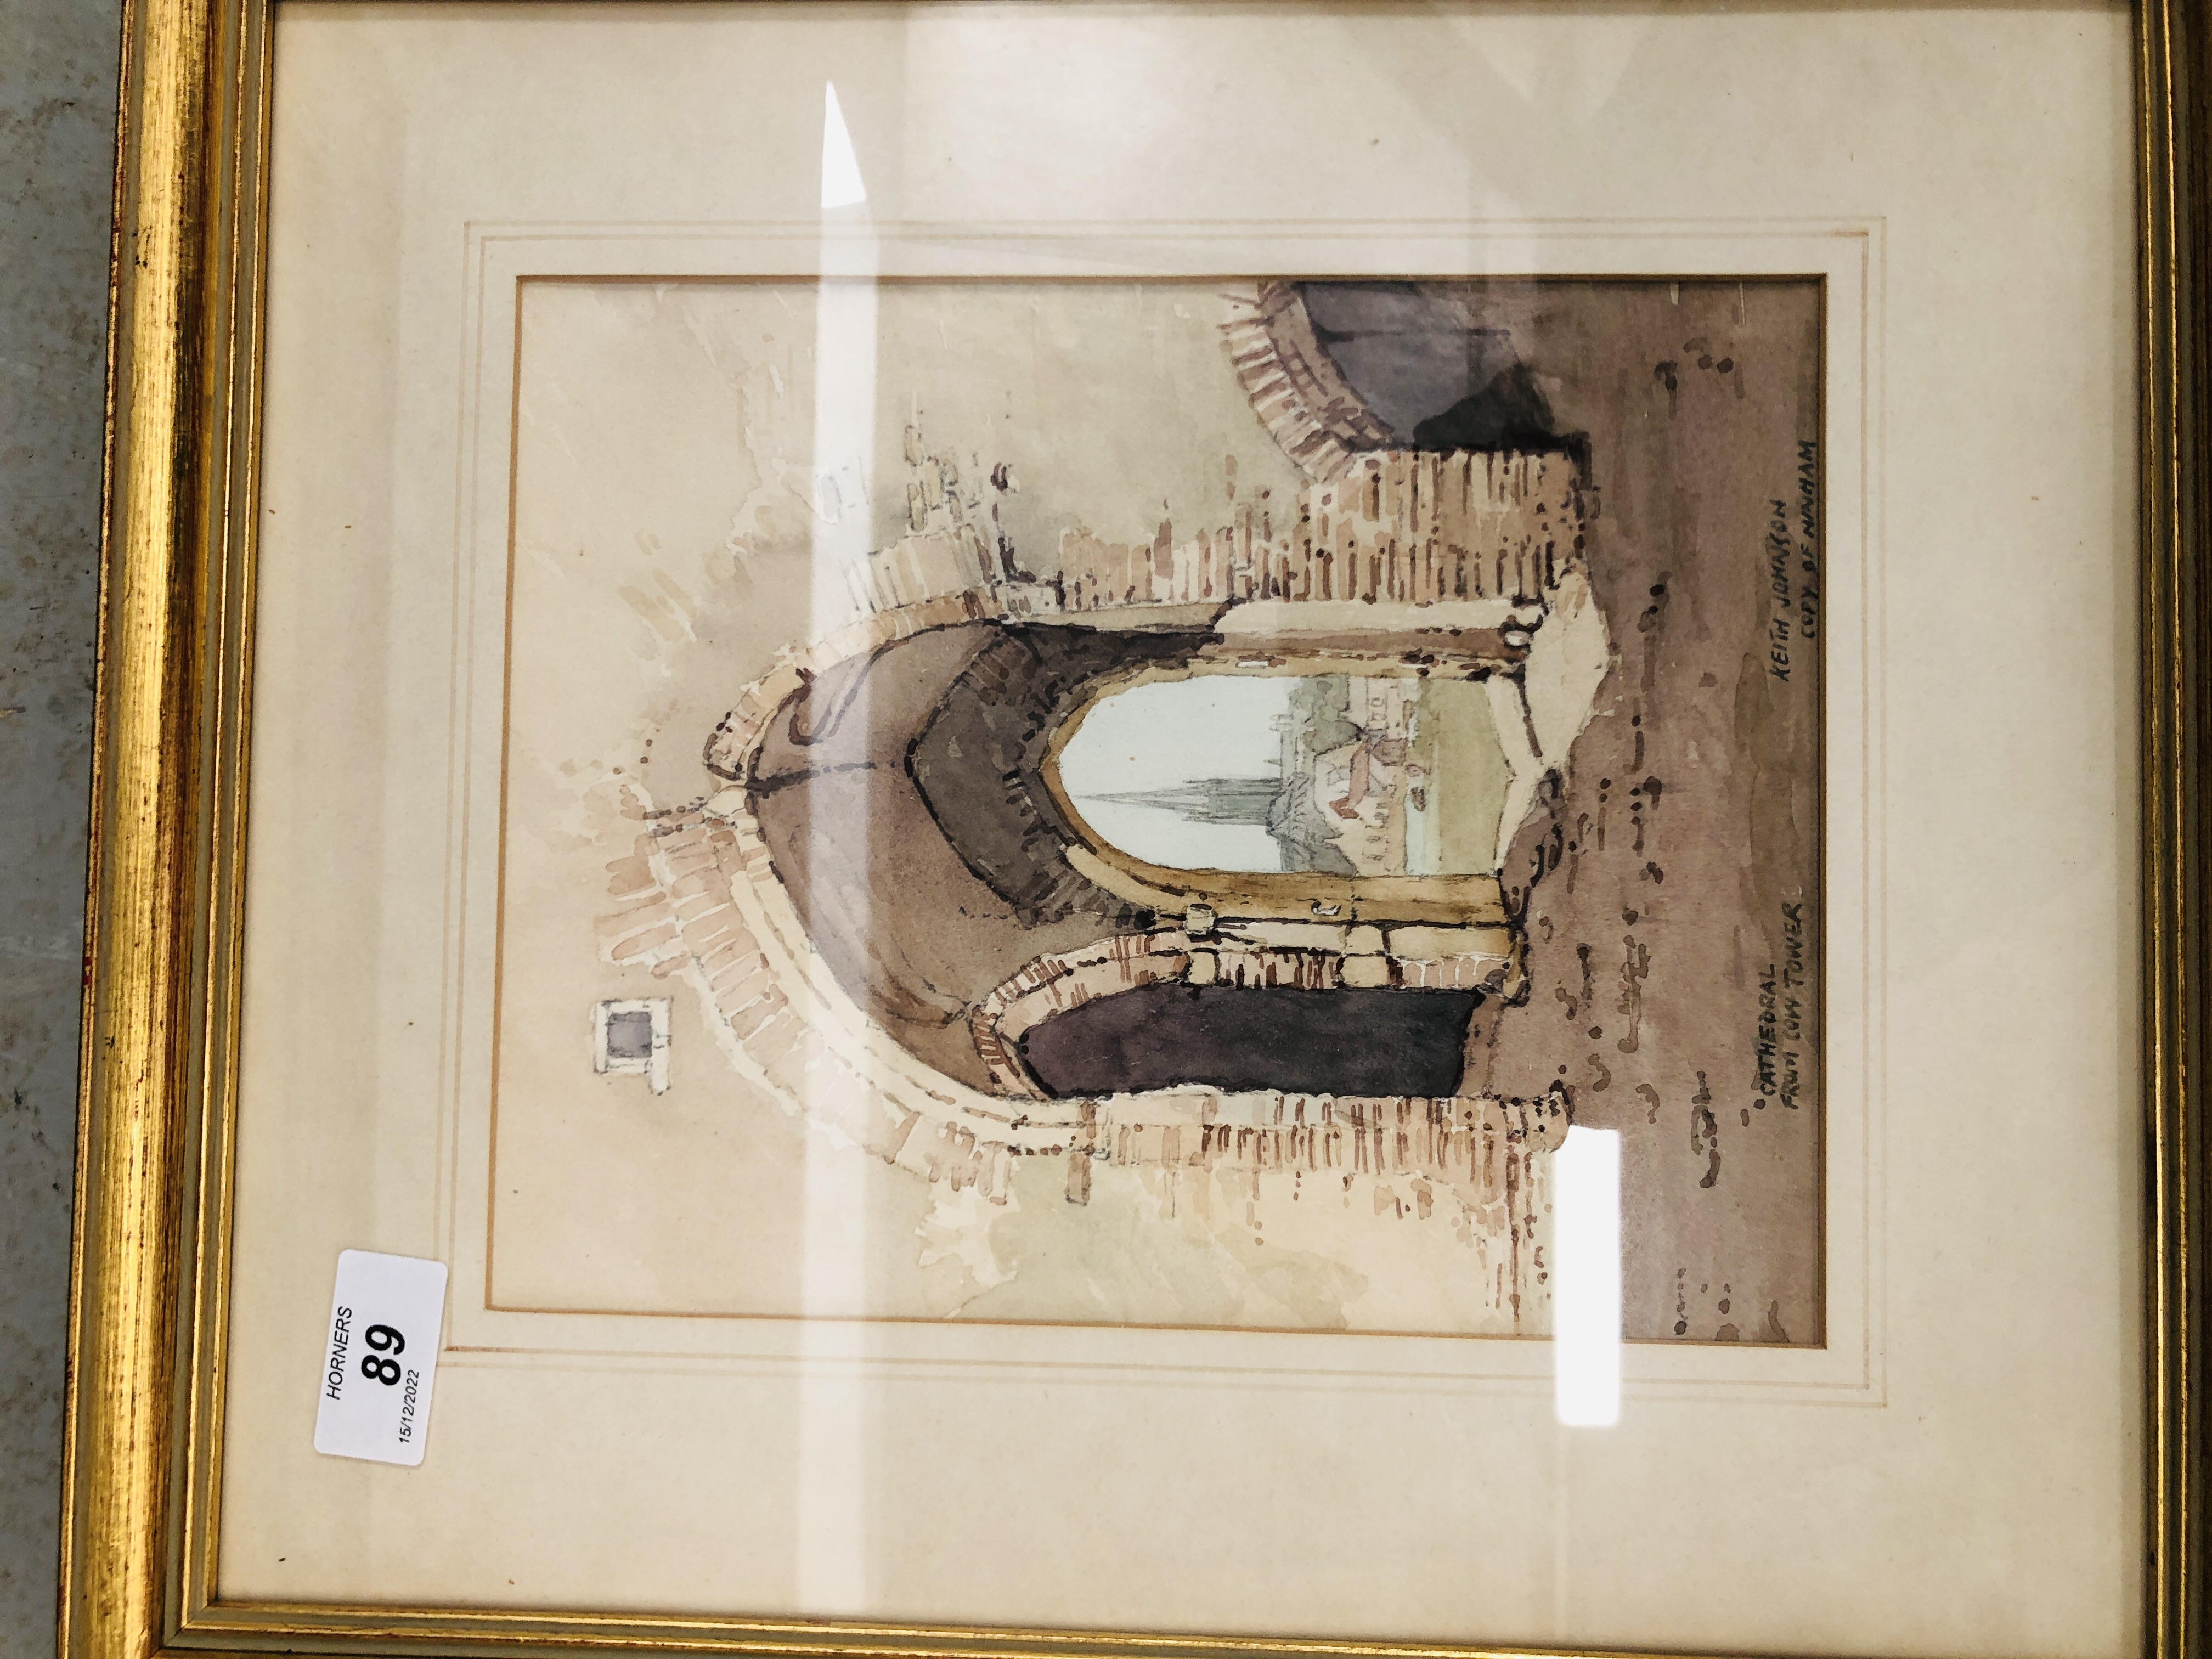 FRAMED AND MOUNTED WATERCOLOUR "CATHEDRAL FROM COW TOWER" BEARING SIGNATURE KEITH JOHNSON ALONG - Image 5 of 6